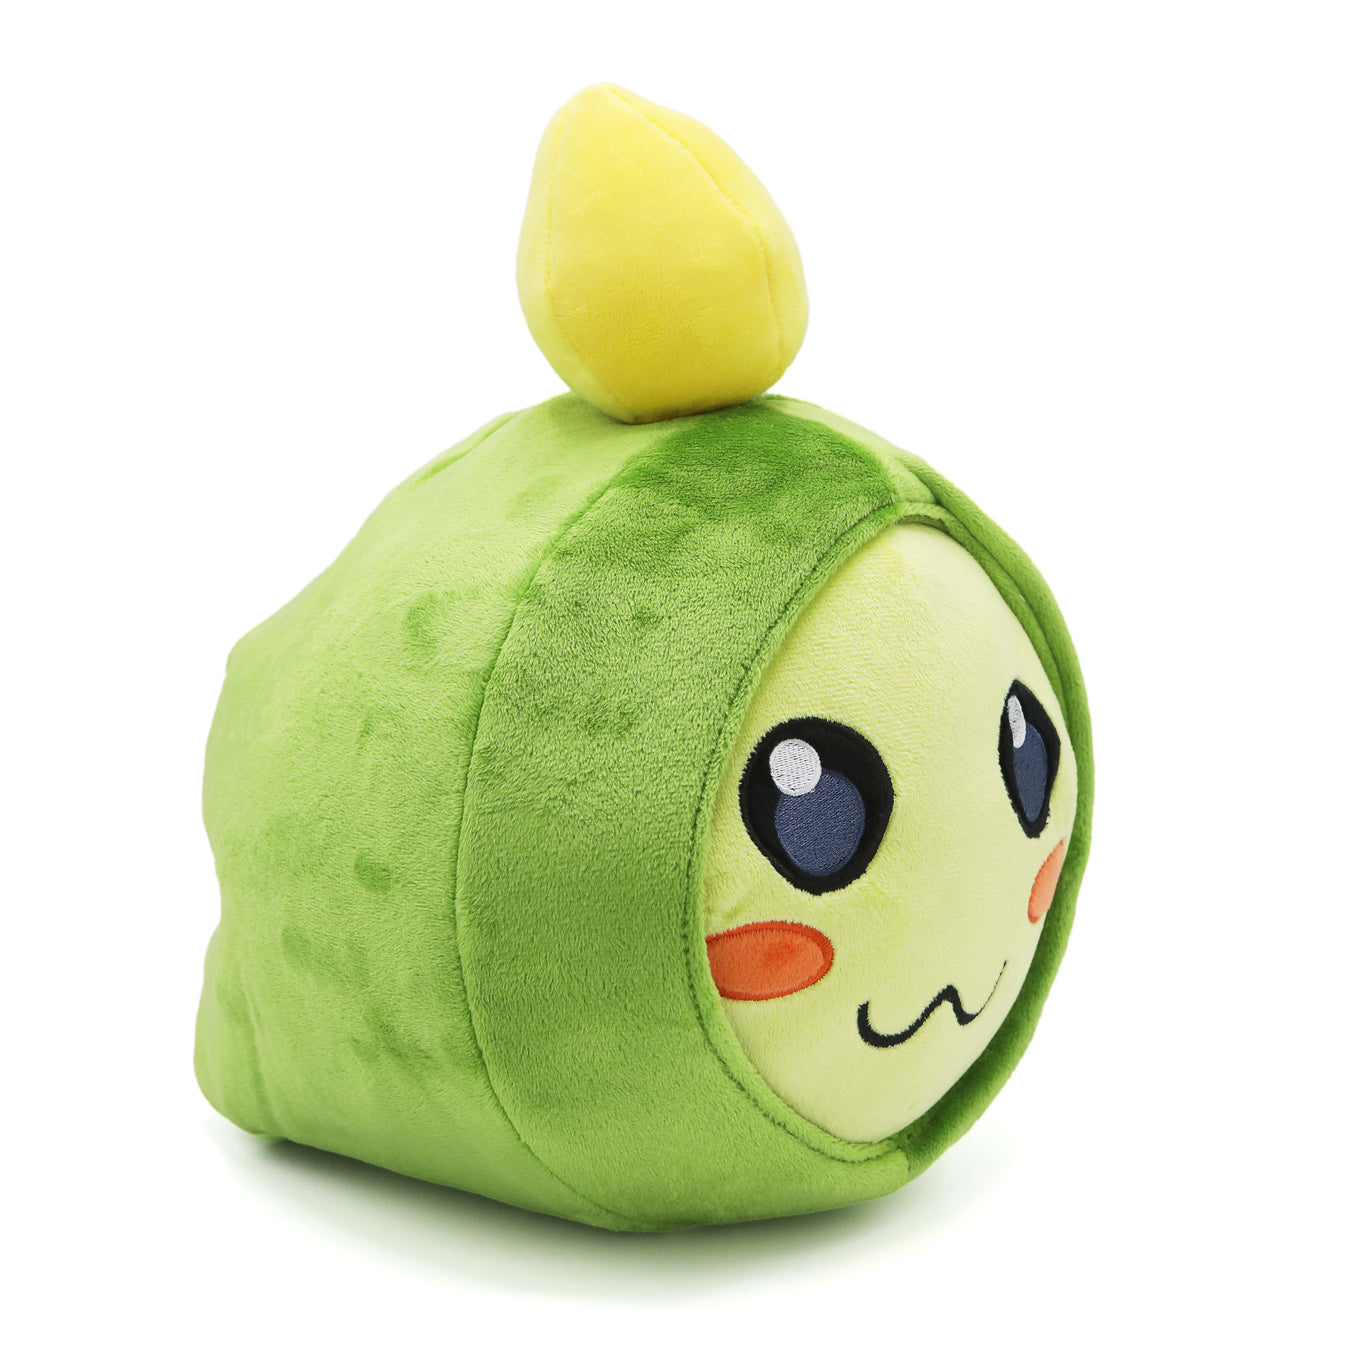 Right side angled view of green Pilfer Plush.